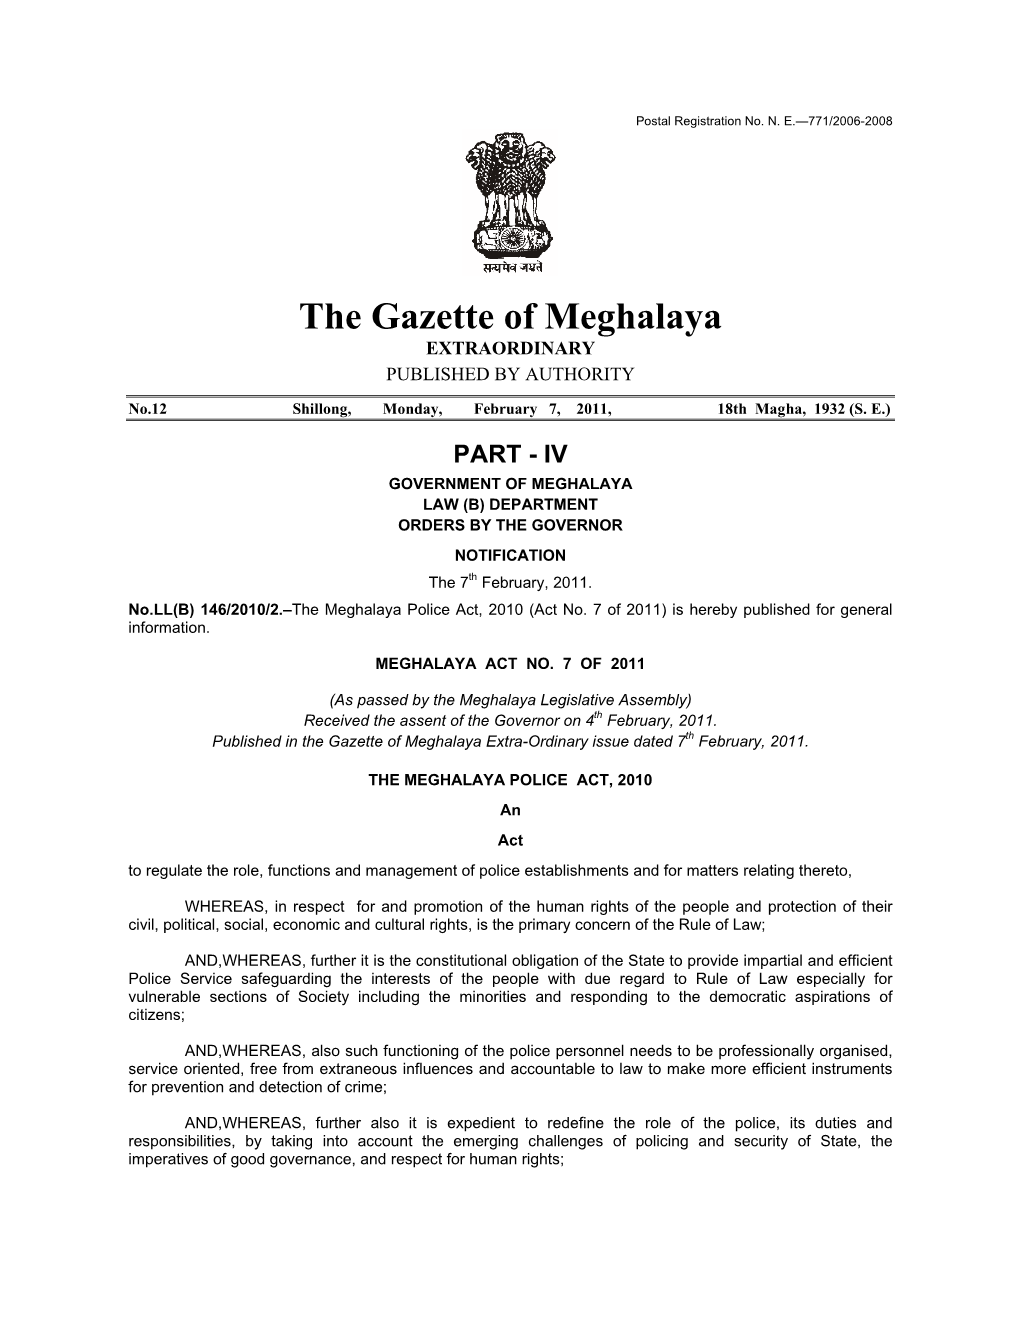 The Meghalaya Police Act, 2010 (Act No. 7 of 2011) Is Hereby Published for General Information